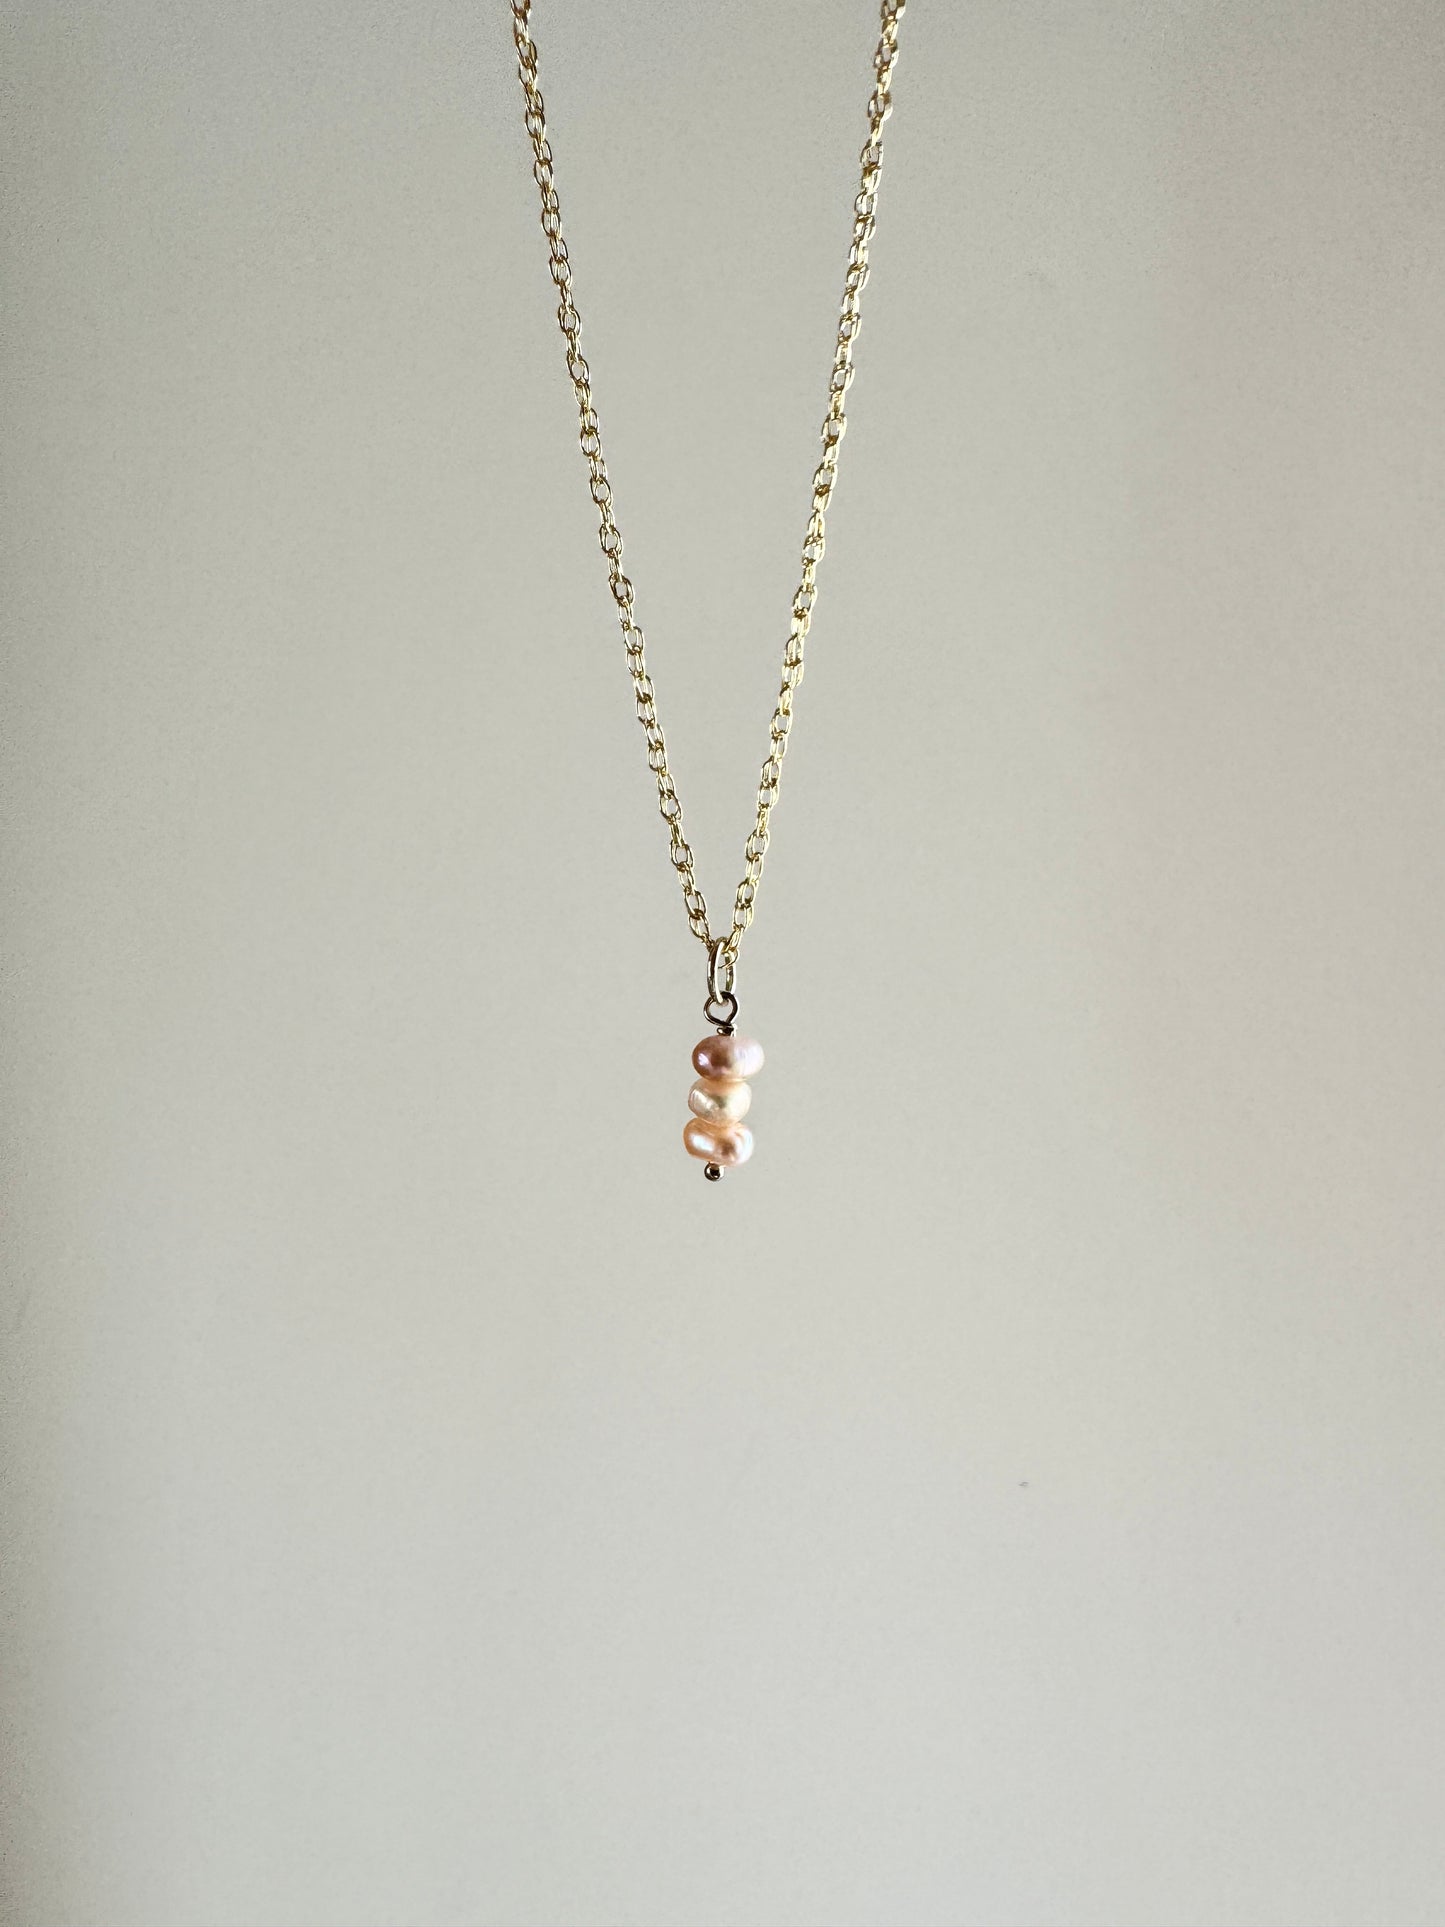 Pink Pearl Necklace Wire Wrapped in 14K Gold fill with chain